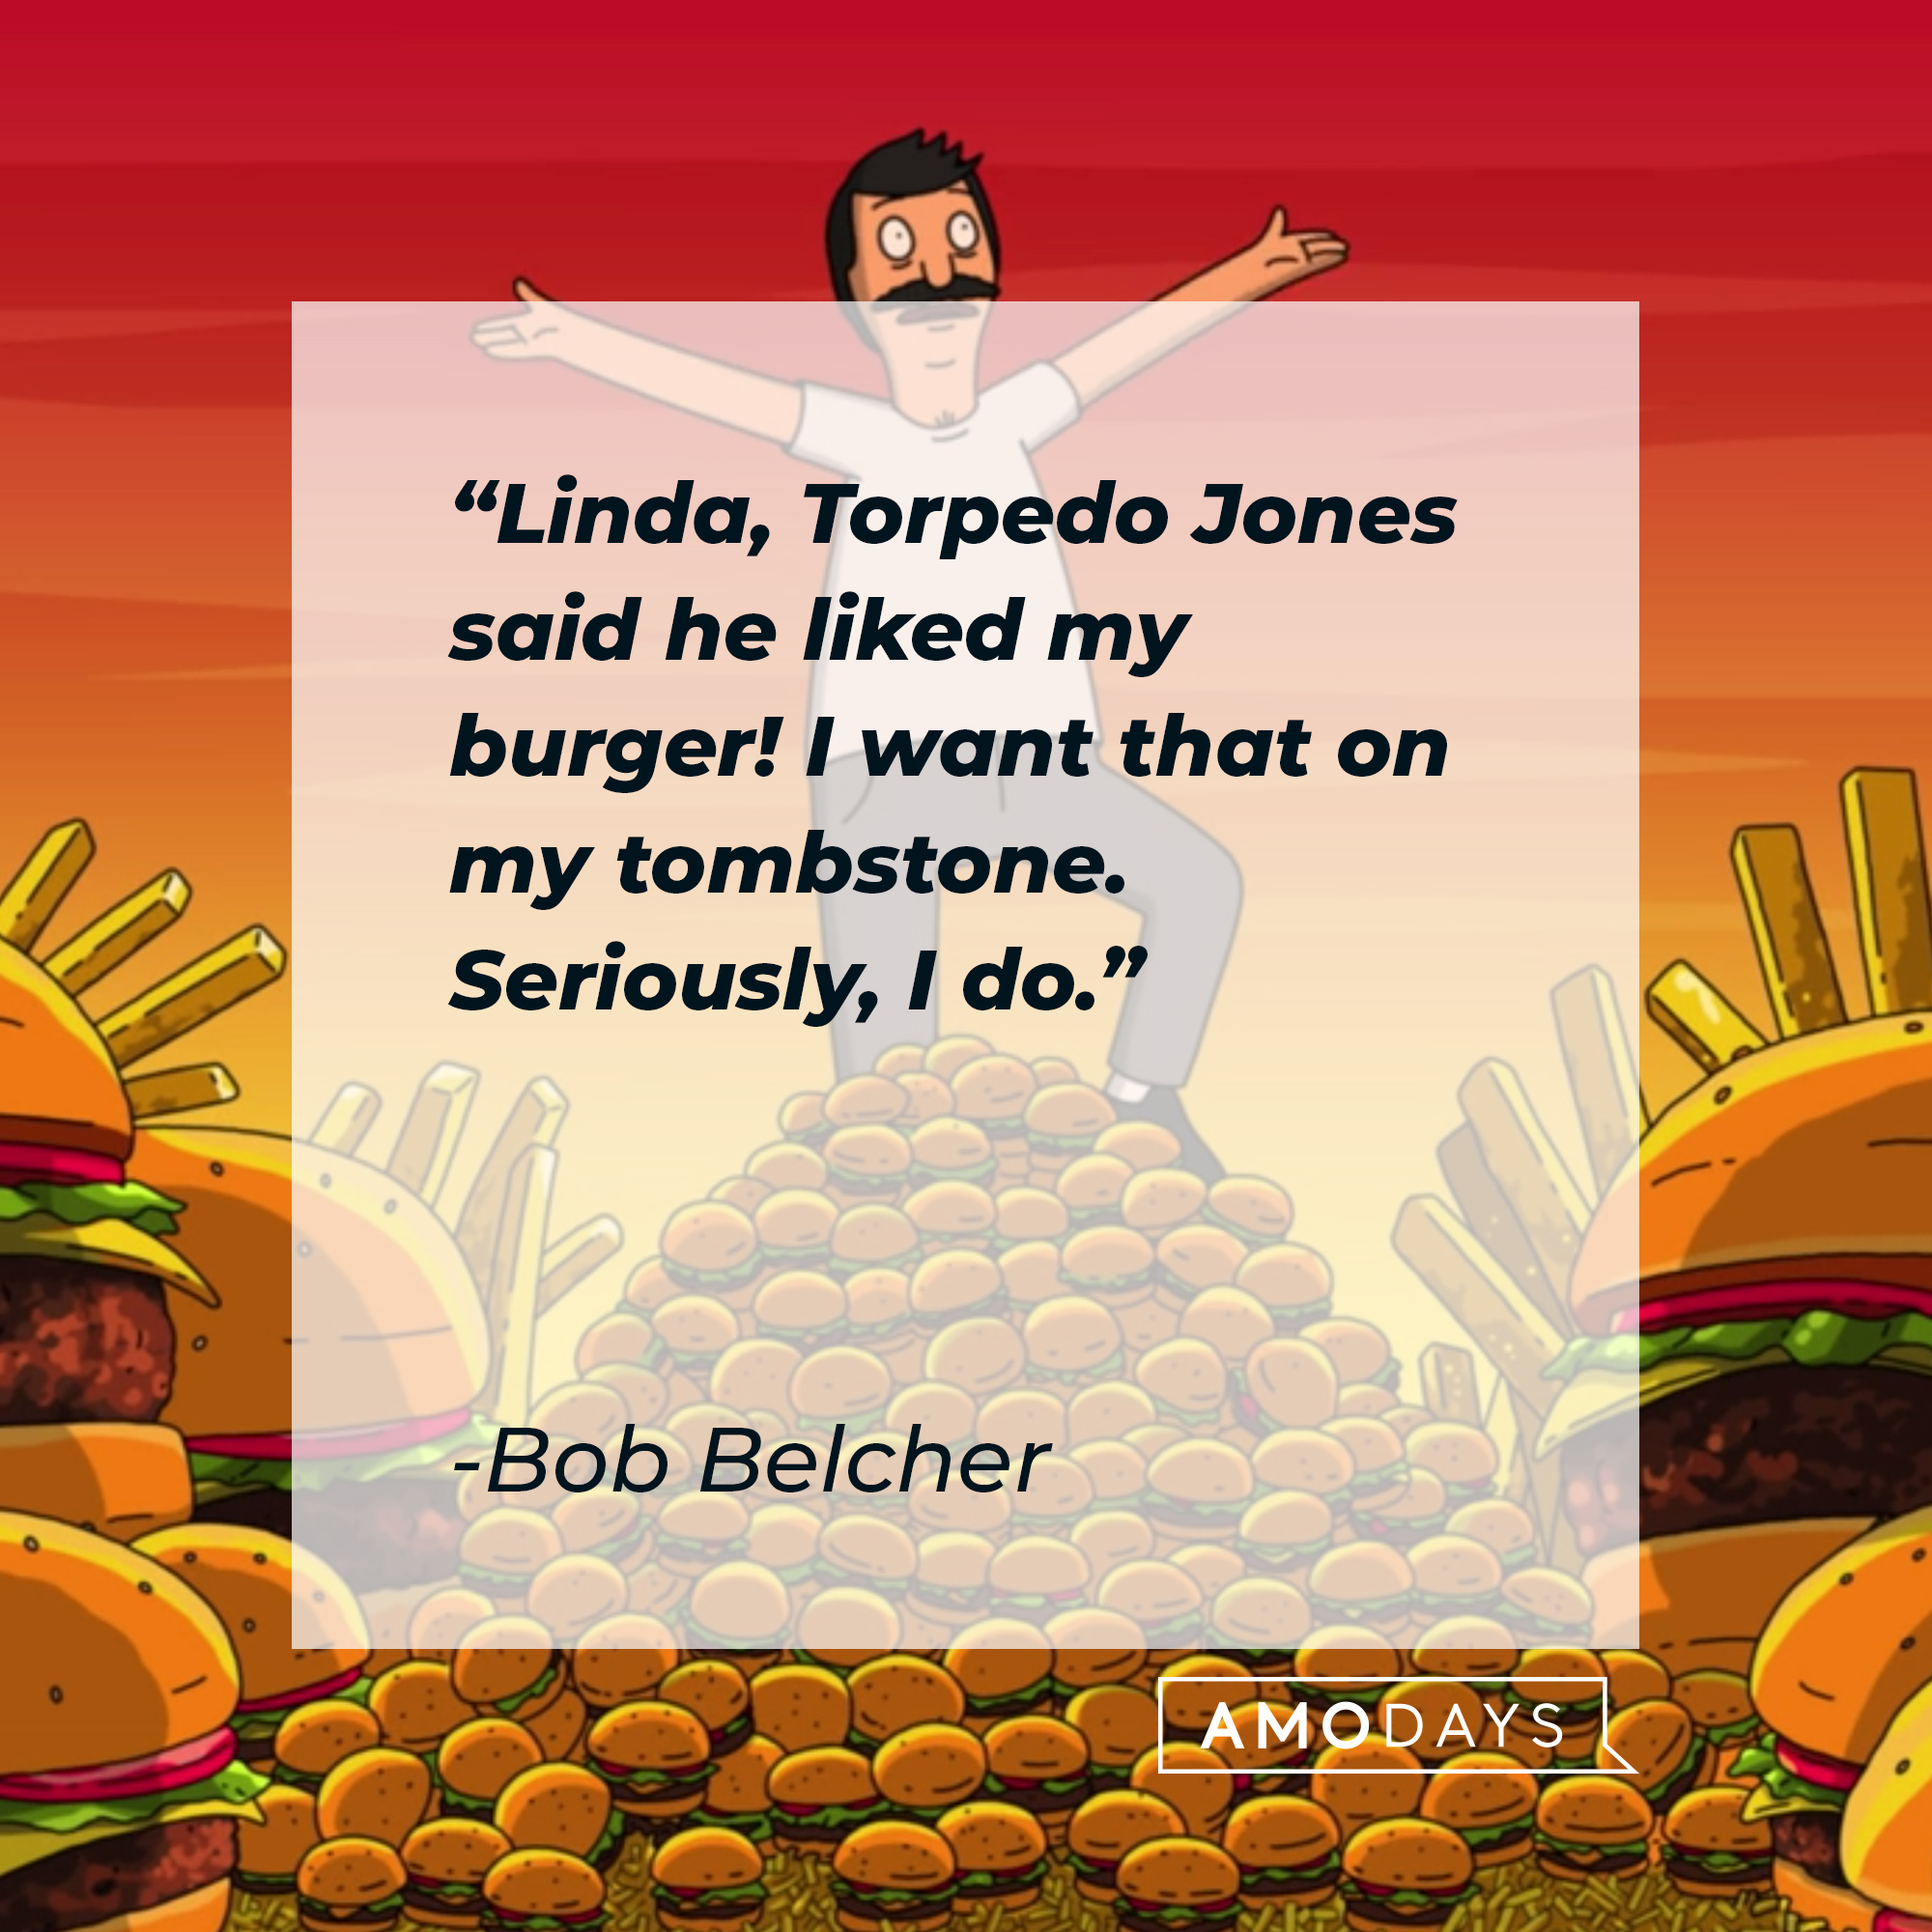 Bob Belcher's quote: “Linda, Torpedo Jones said he liked my burger! I want that on my tombstone. Seriously, I do.” | Source: facebook.com/BobsBurgers